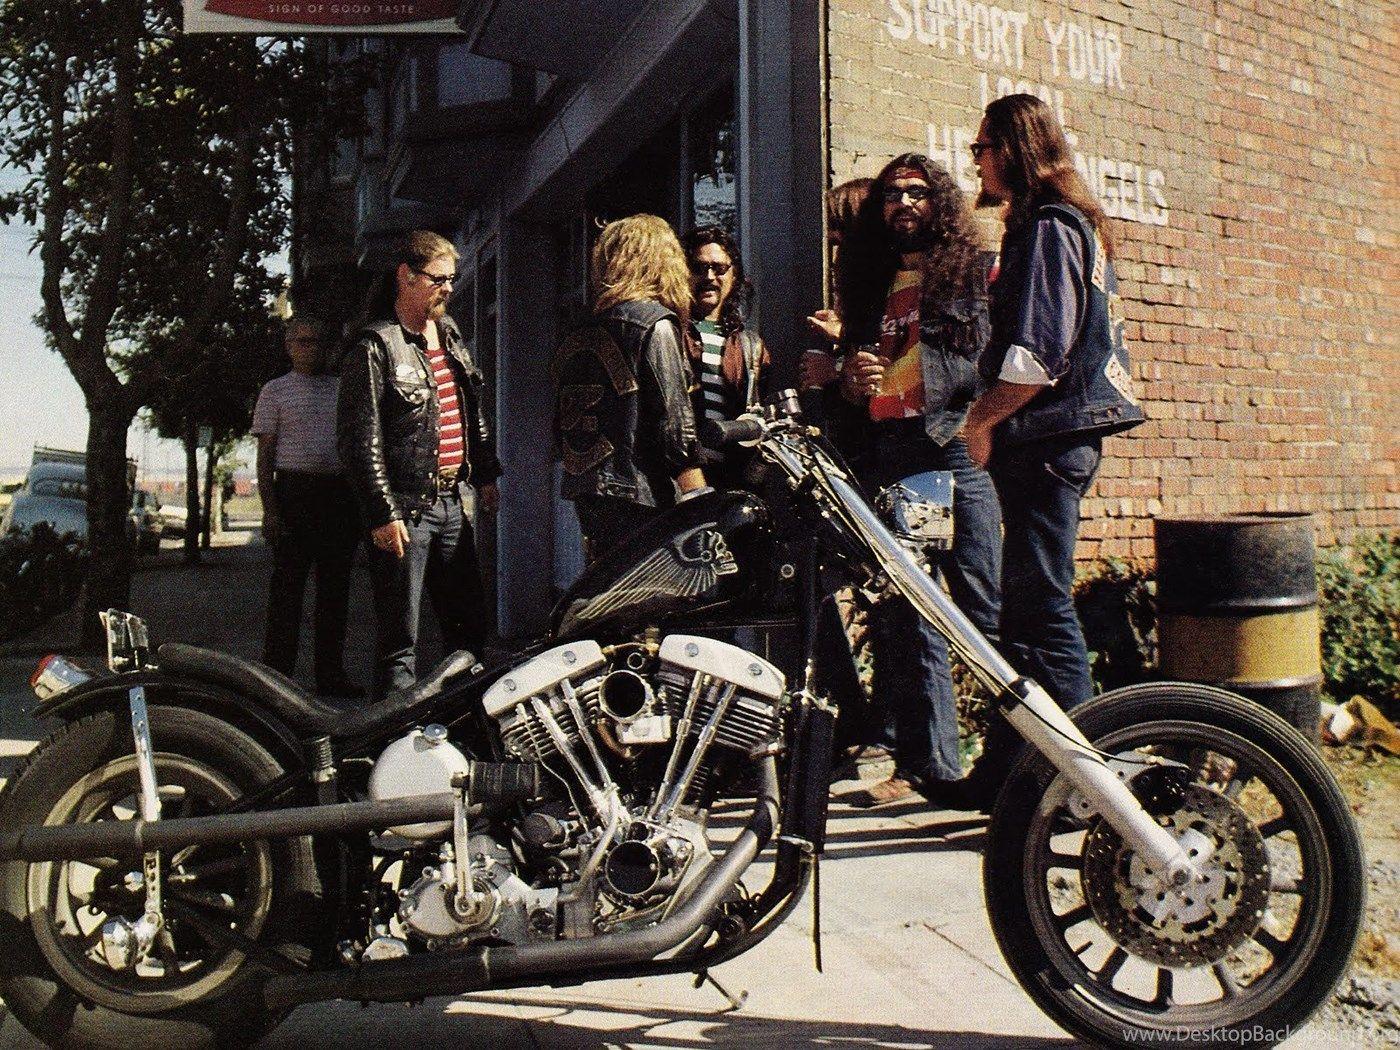 Support Your Local Hell's Angels Desktop Background